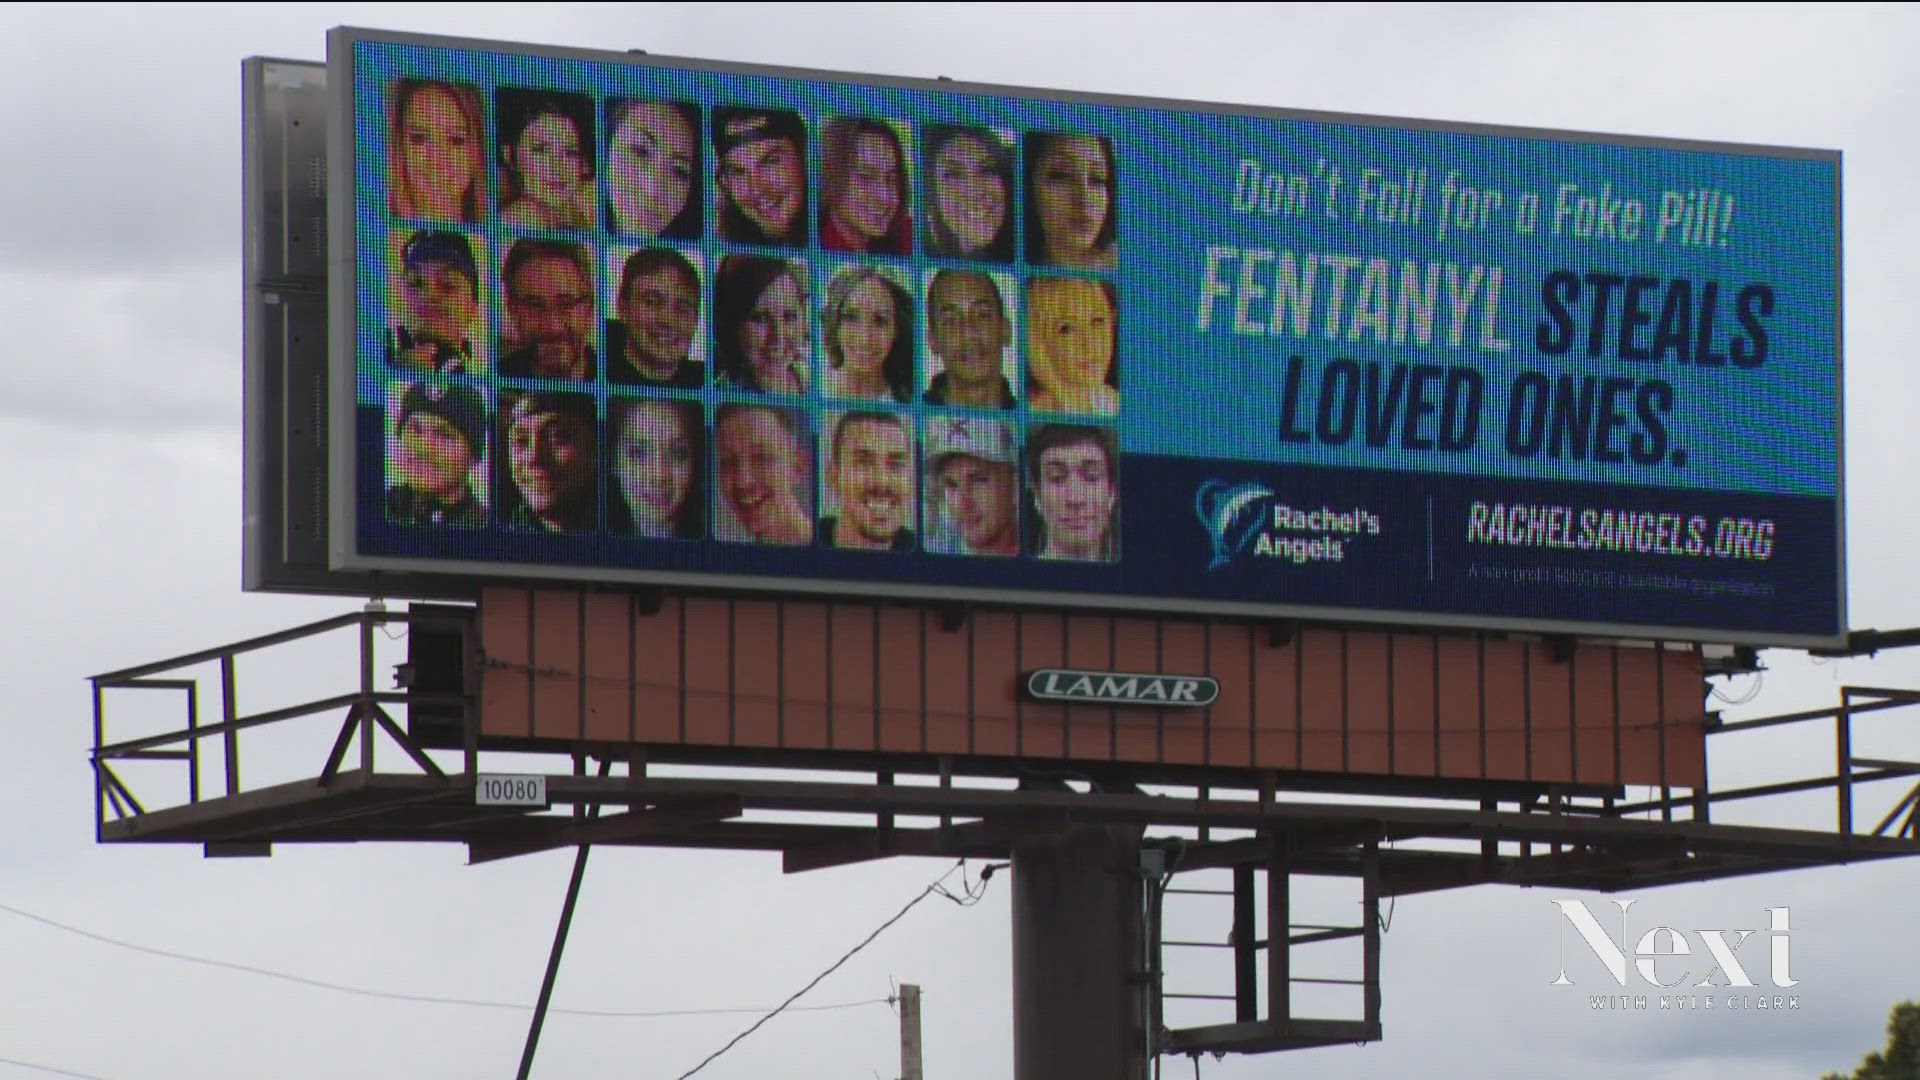 The billboard is a mother's hope to catch our eye and create conversations about what fentanyl is doing in Colorado.